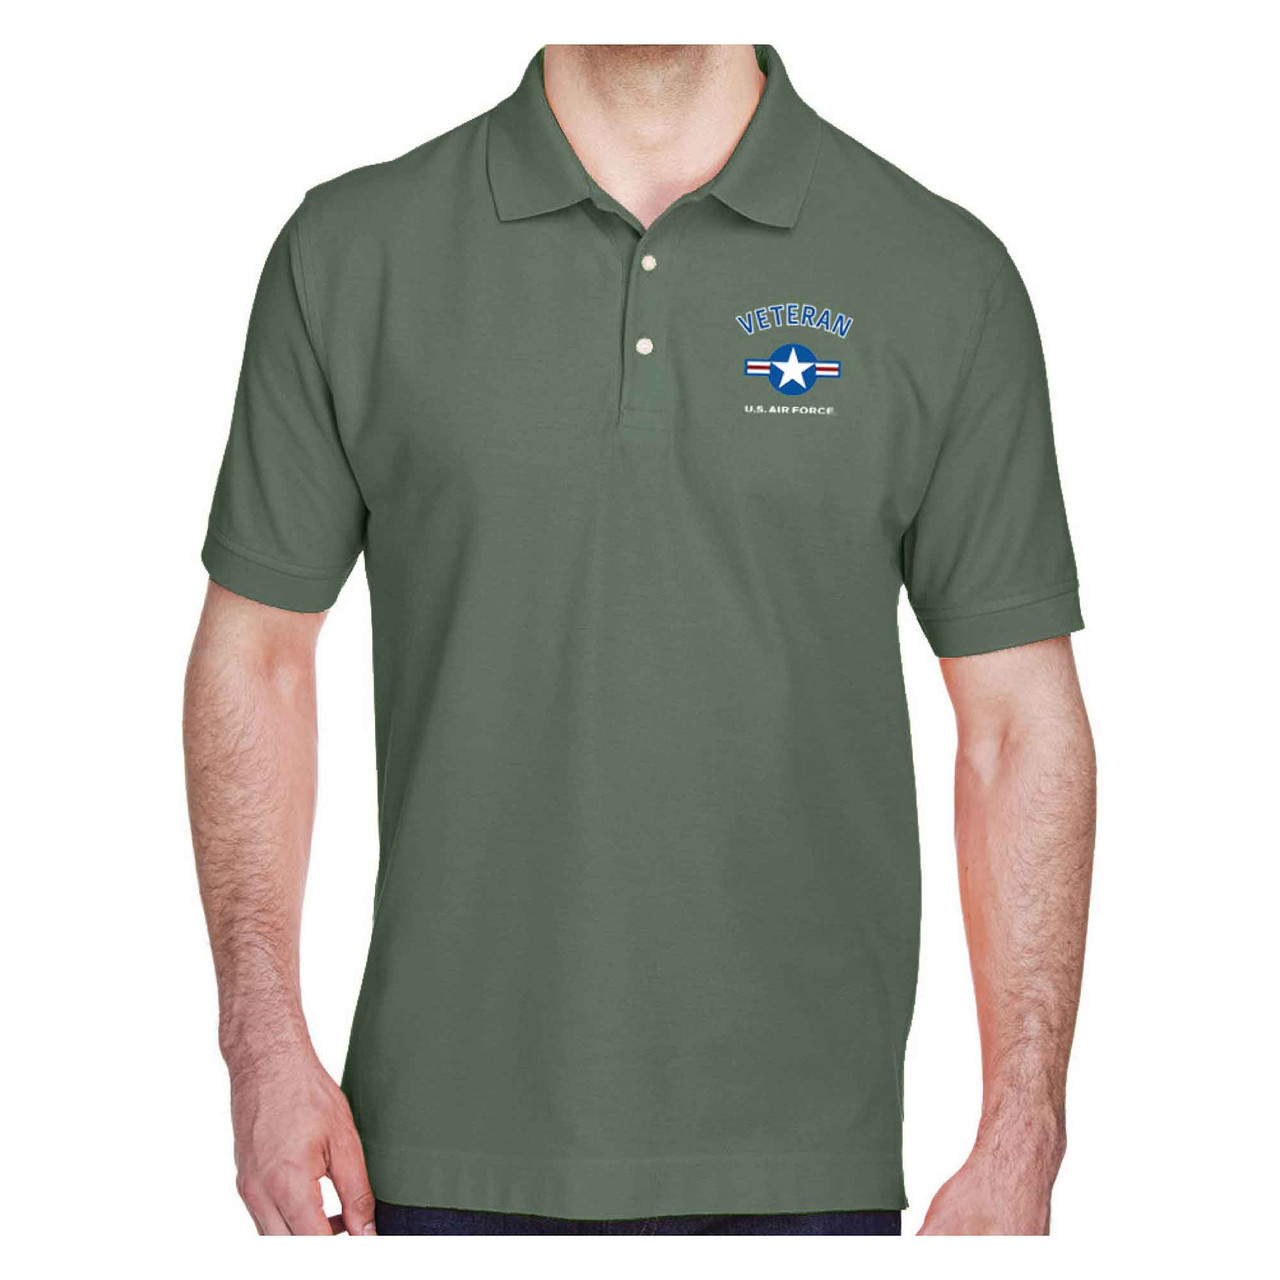 officially licensed us air force veteran Olive Drab polo usaf roundel logo embroidered front view